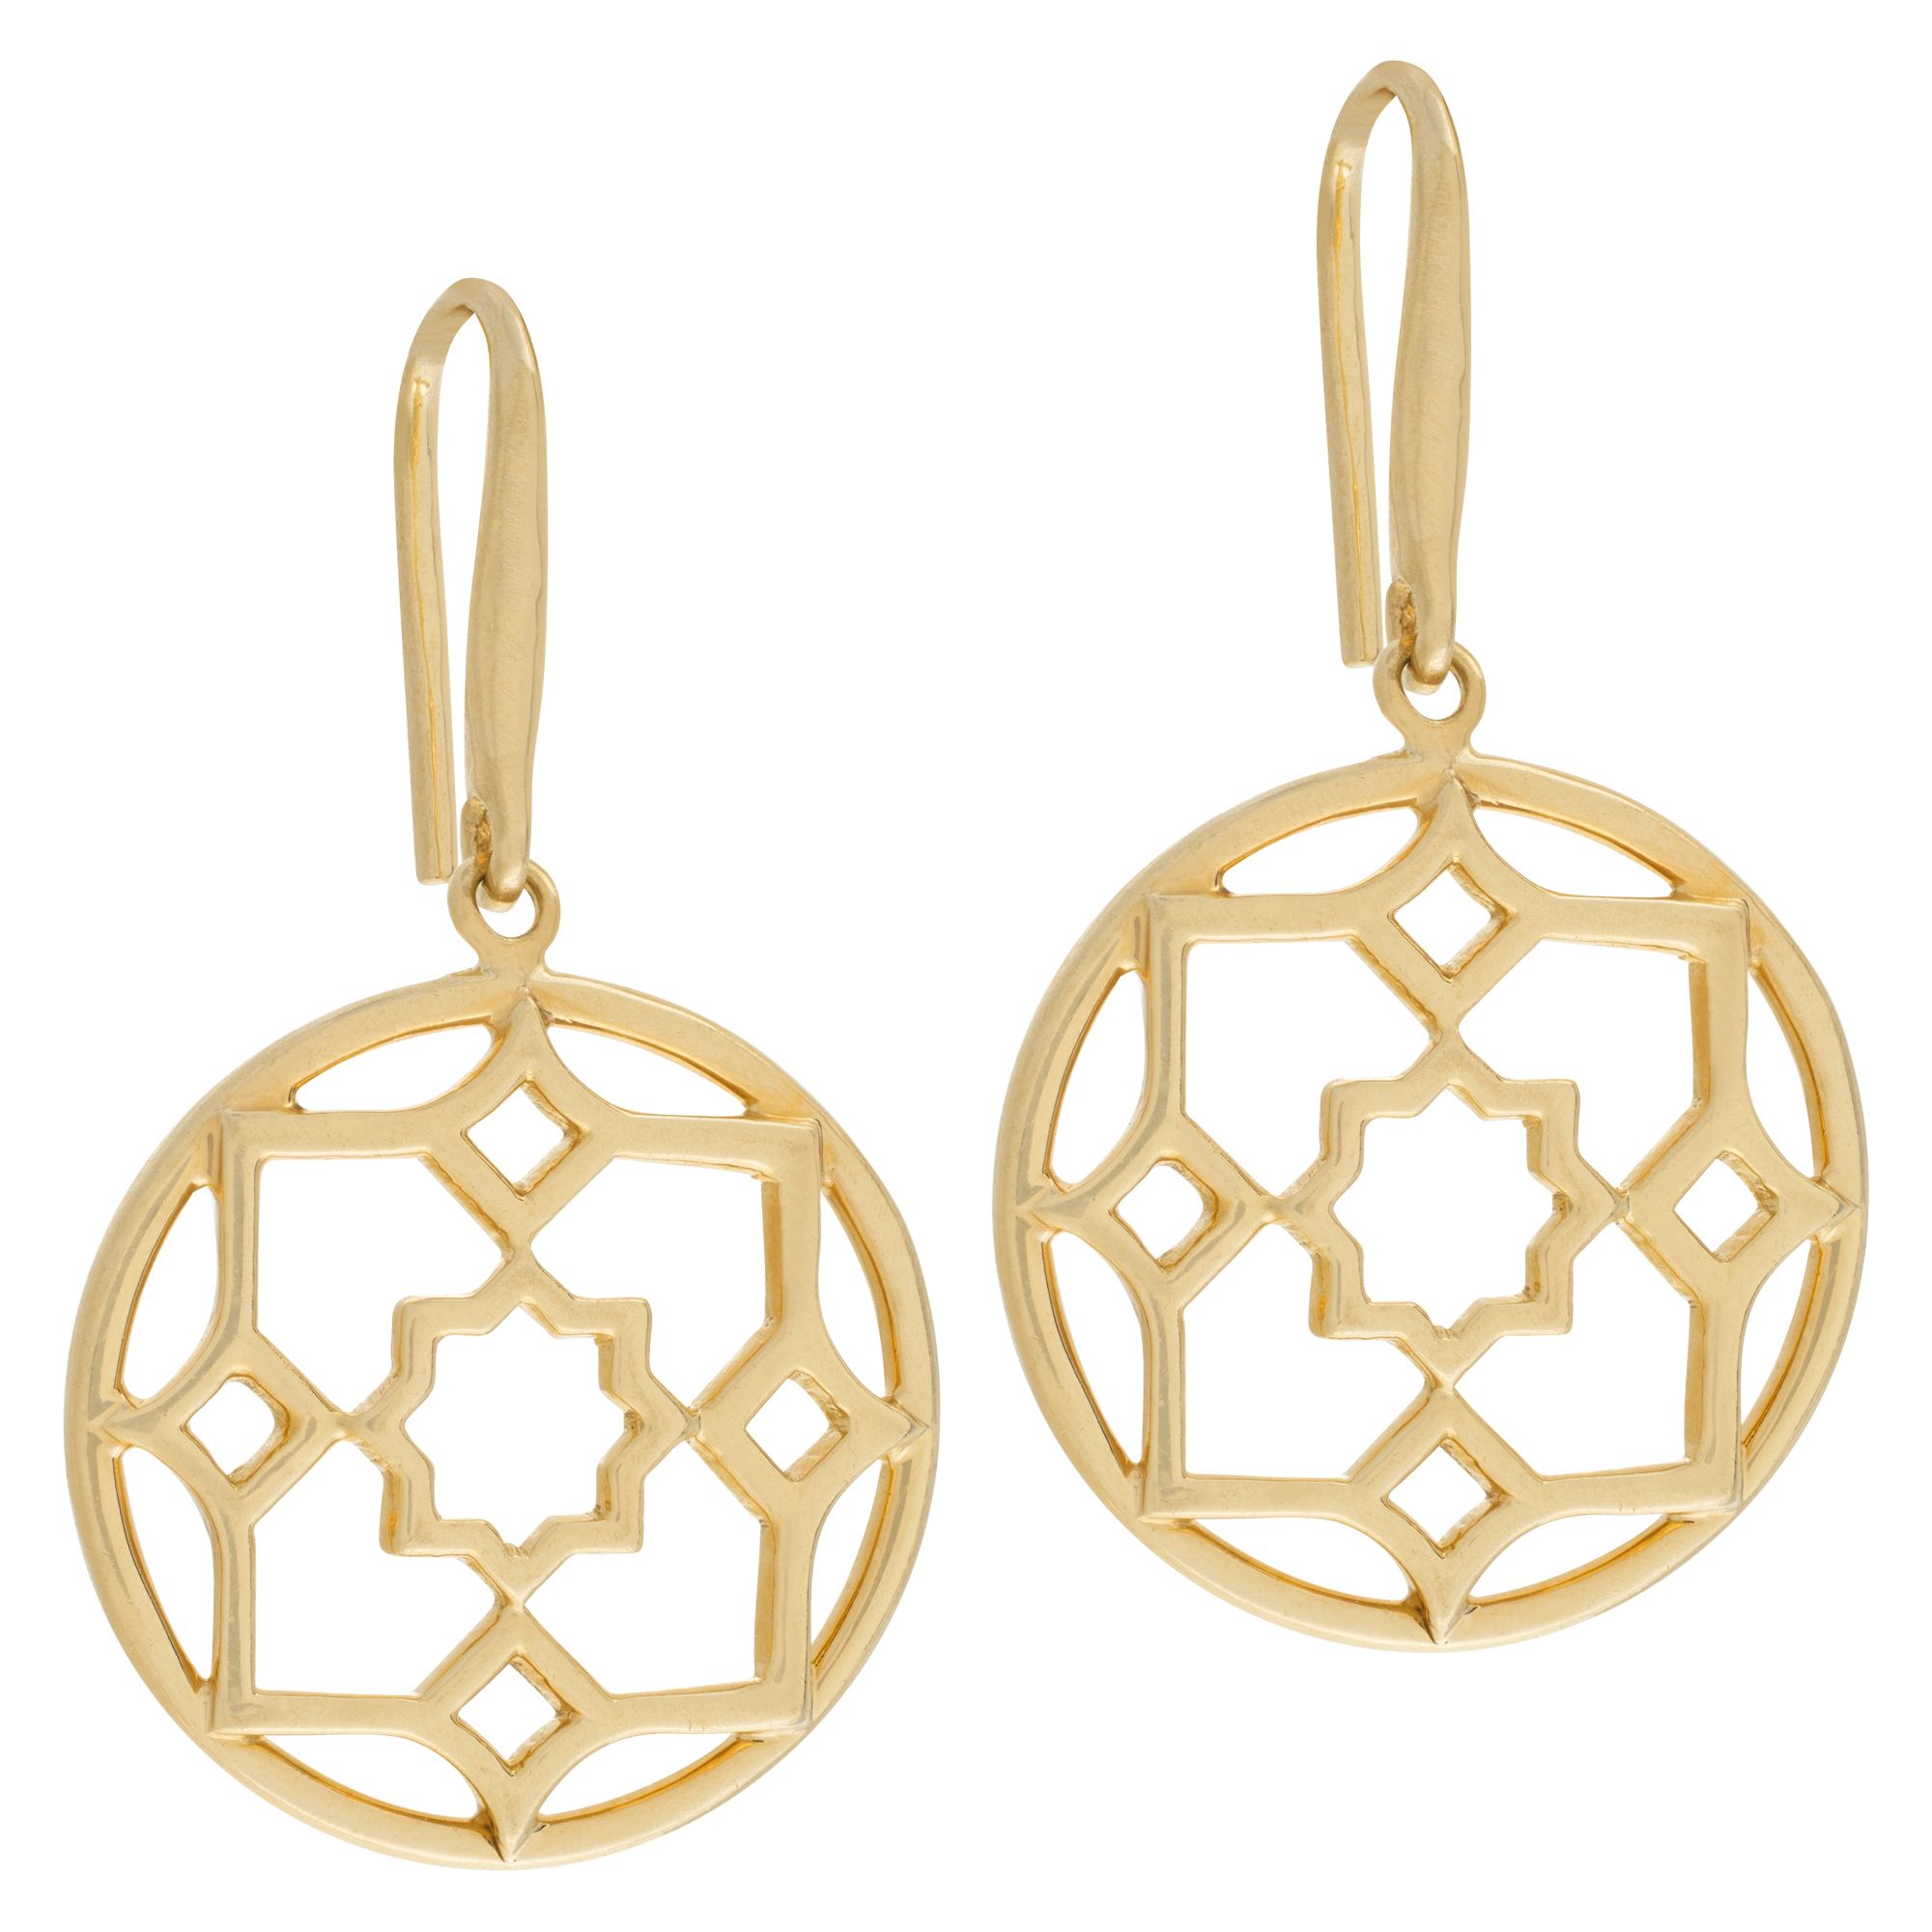 Tiffany & Co., Paloma Picasso "Zellige" collection, 18k dangling medallion earring image 1